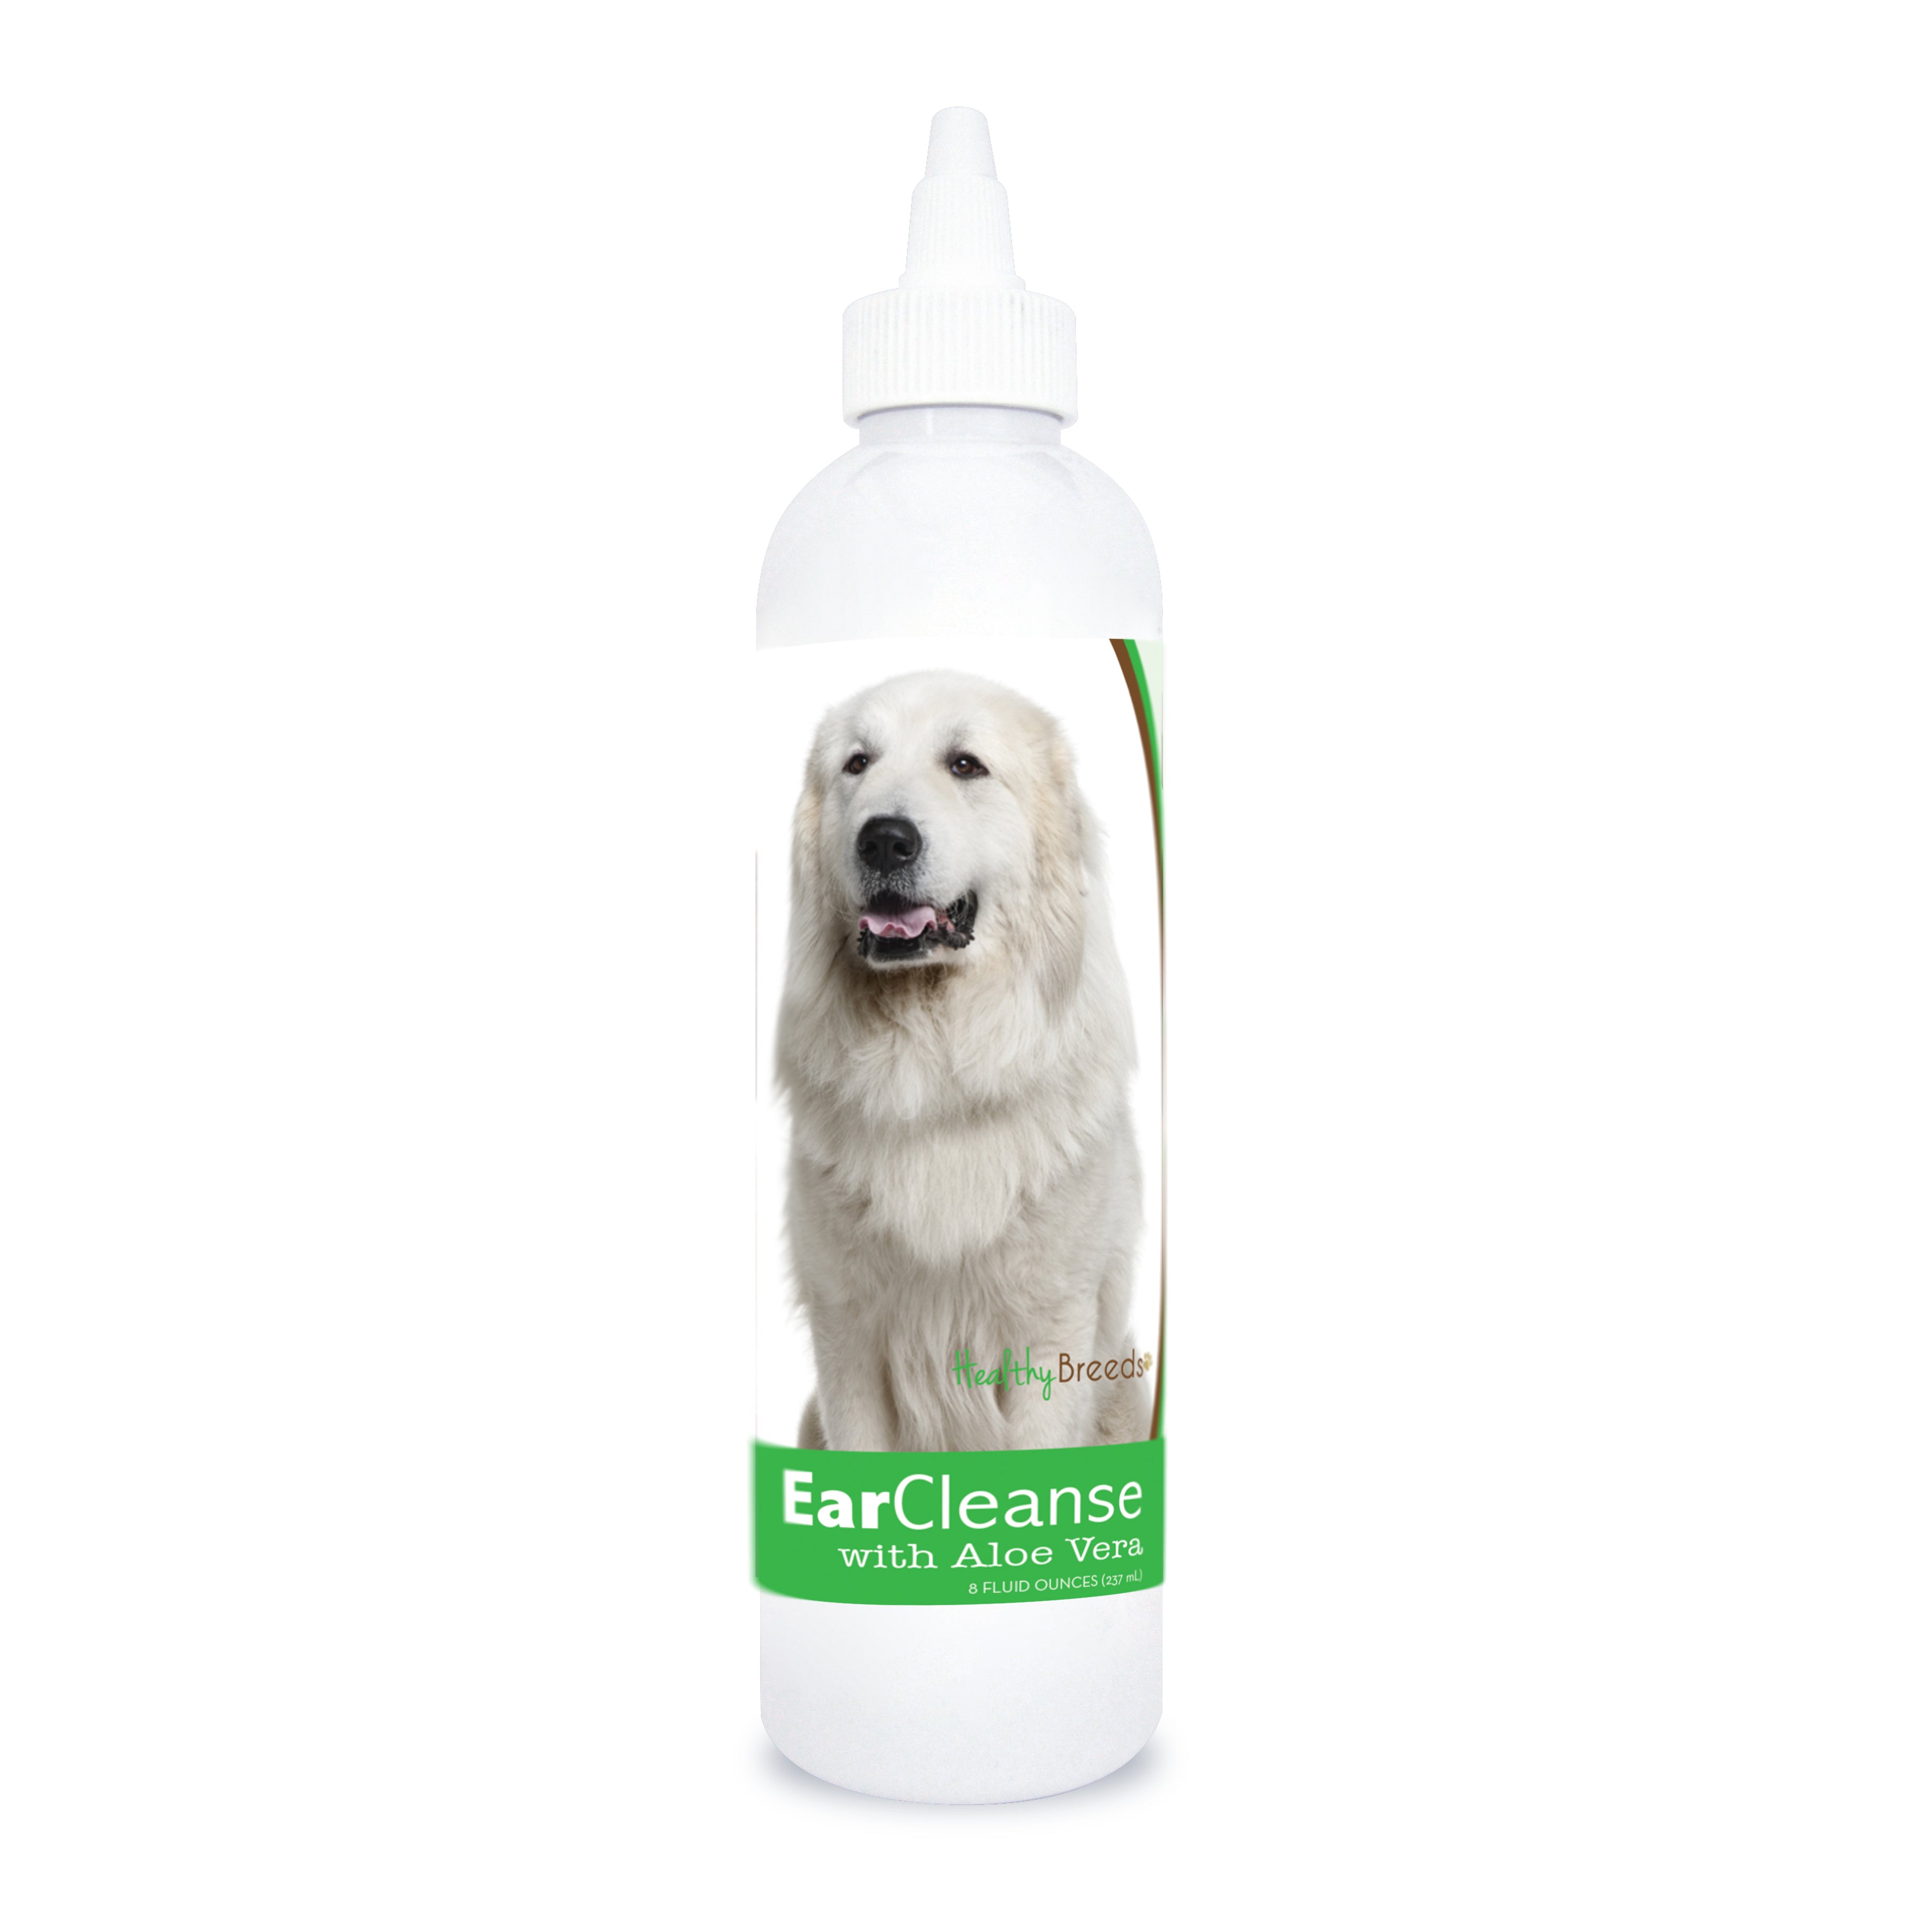 Great Pyrenees Ear Cleanse with Aloe Vera Cucumber Melon 8 oz